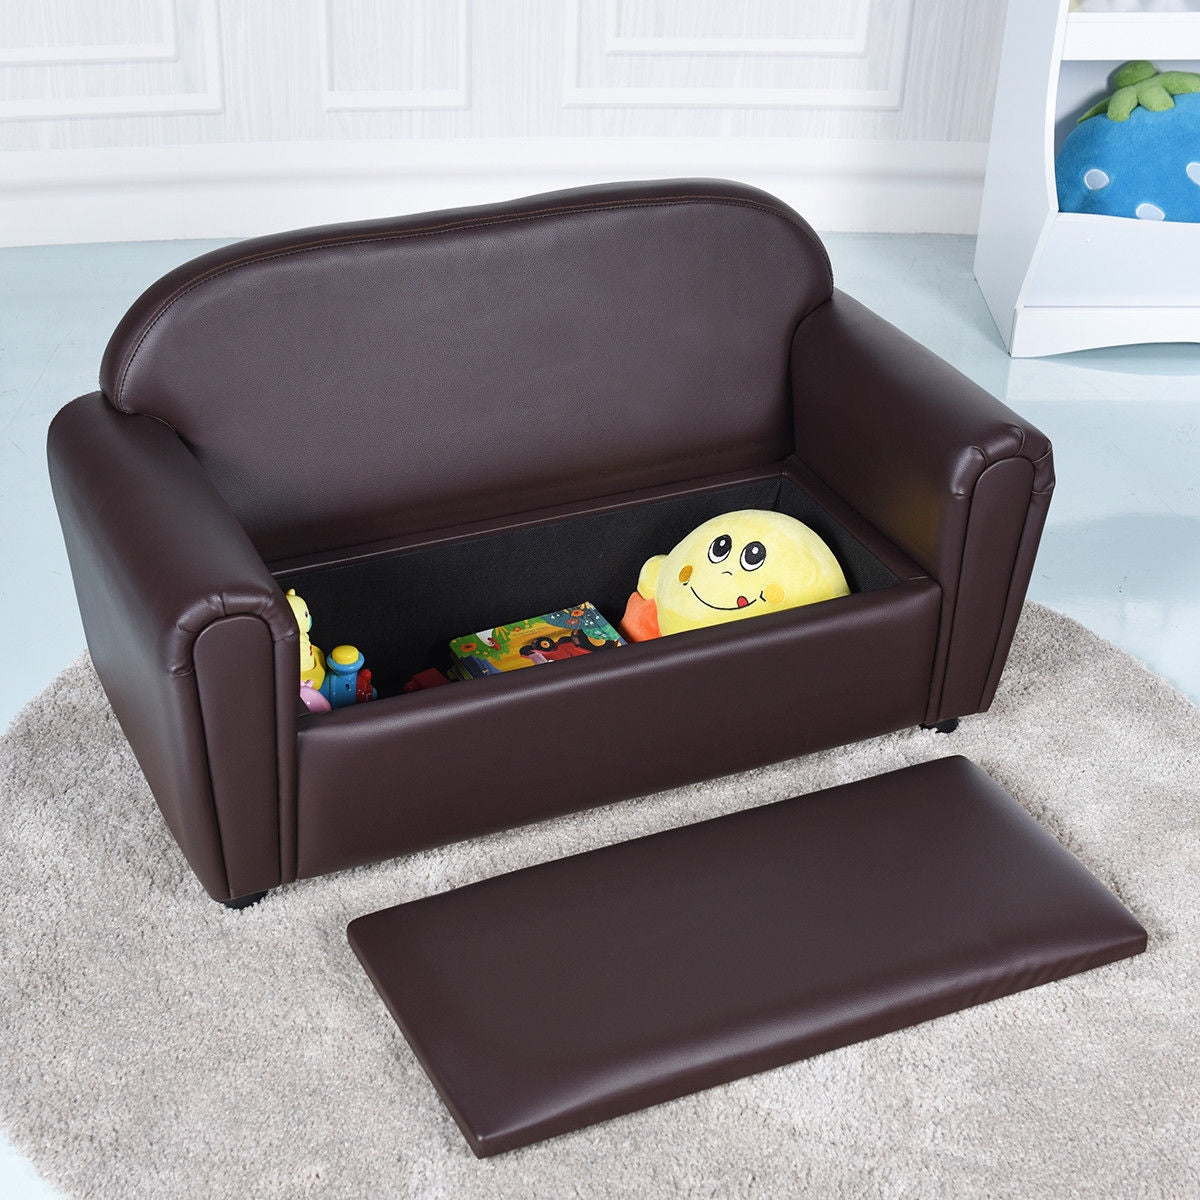 Underneath Storage Box: This sweet design provides accessible storage for toys and books. Kids can easily retrieve their toys or books from underneath the seat and have a seat to play or read. The handle attached to the seat makes opening the storage box a breeze.